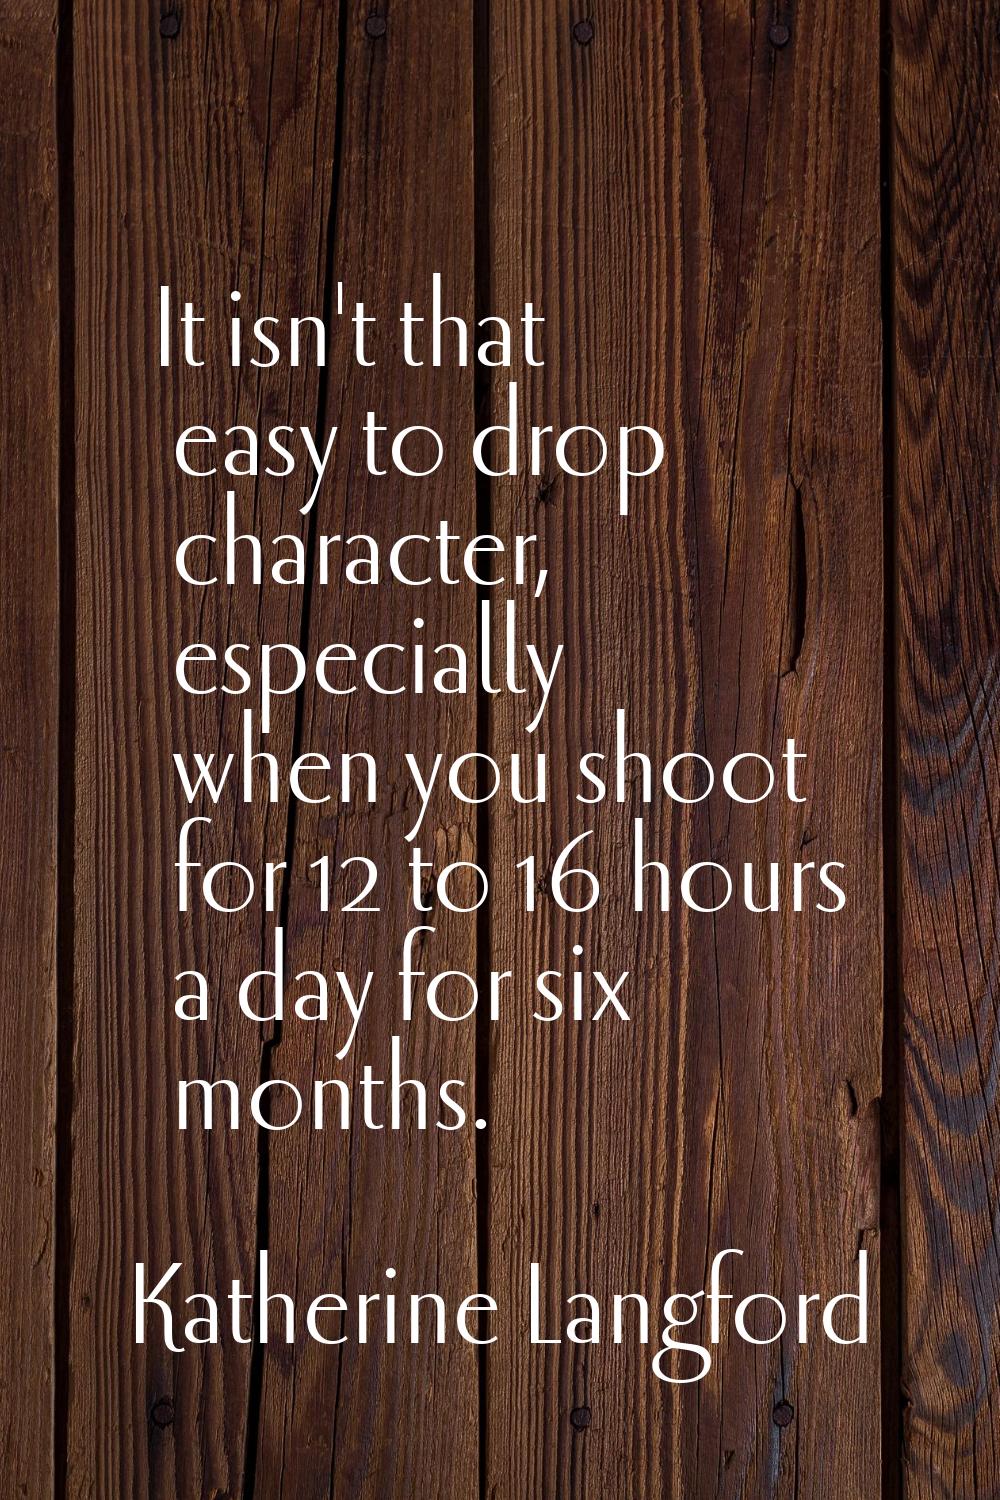 It isn't that easy to drop character, especially when you shoot for 12 to 16 hours a day for six mo